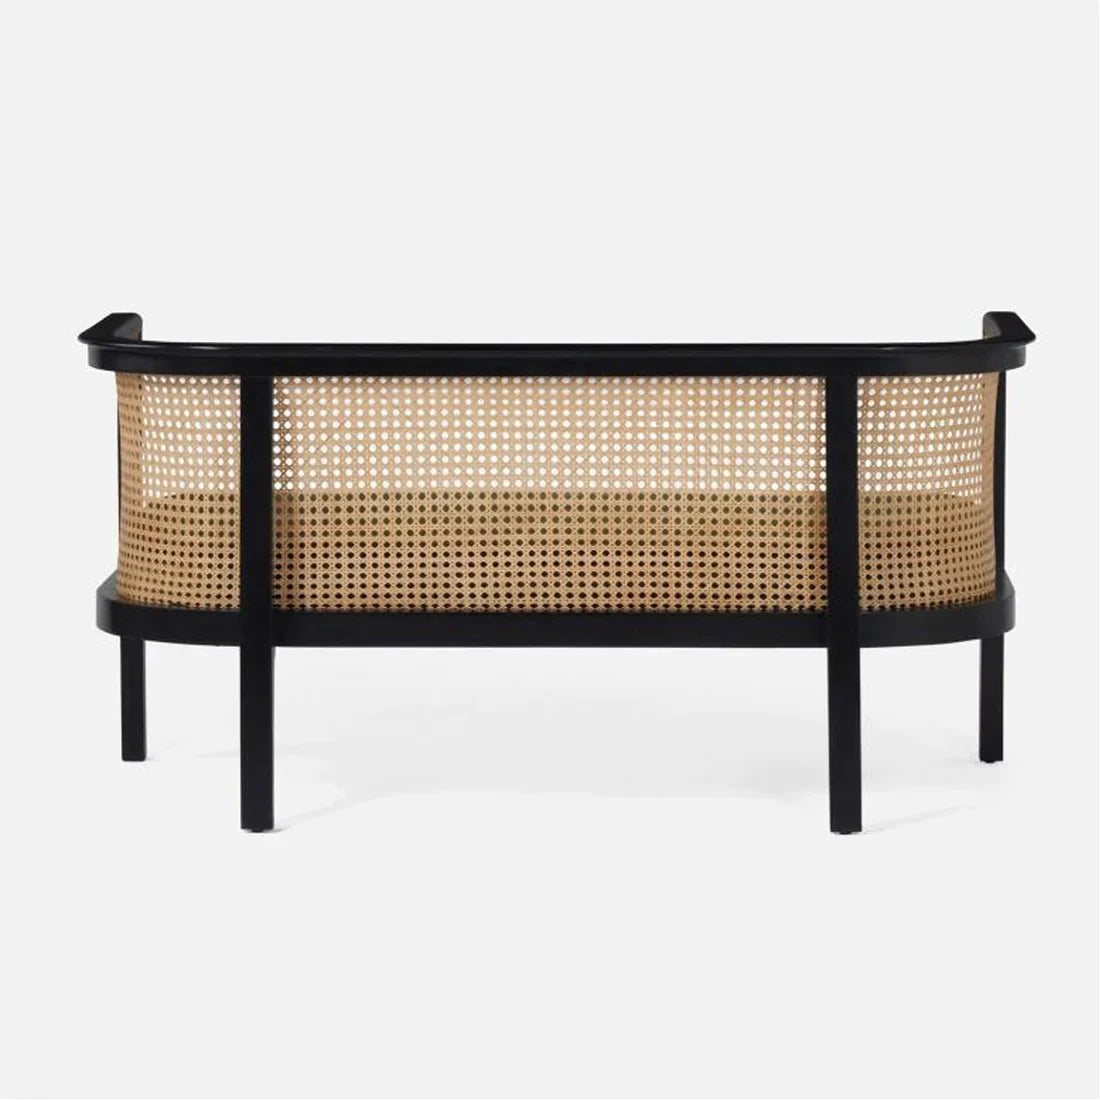 Entryway Rattan Sofa with Upholstered Seat - INTERIORTONIC